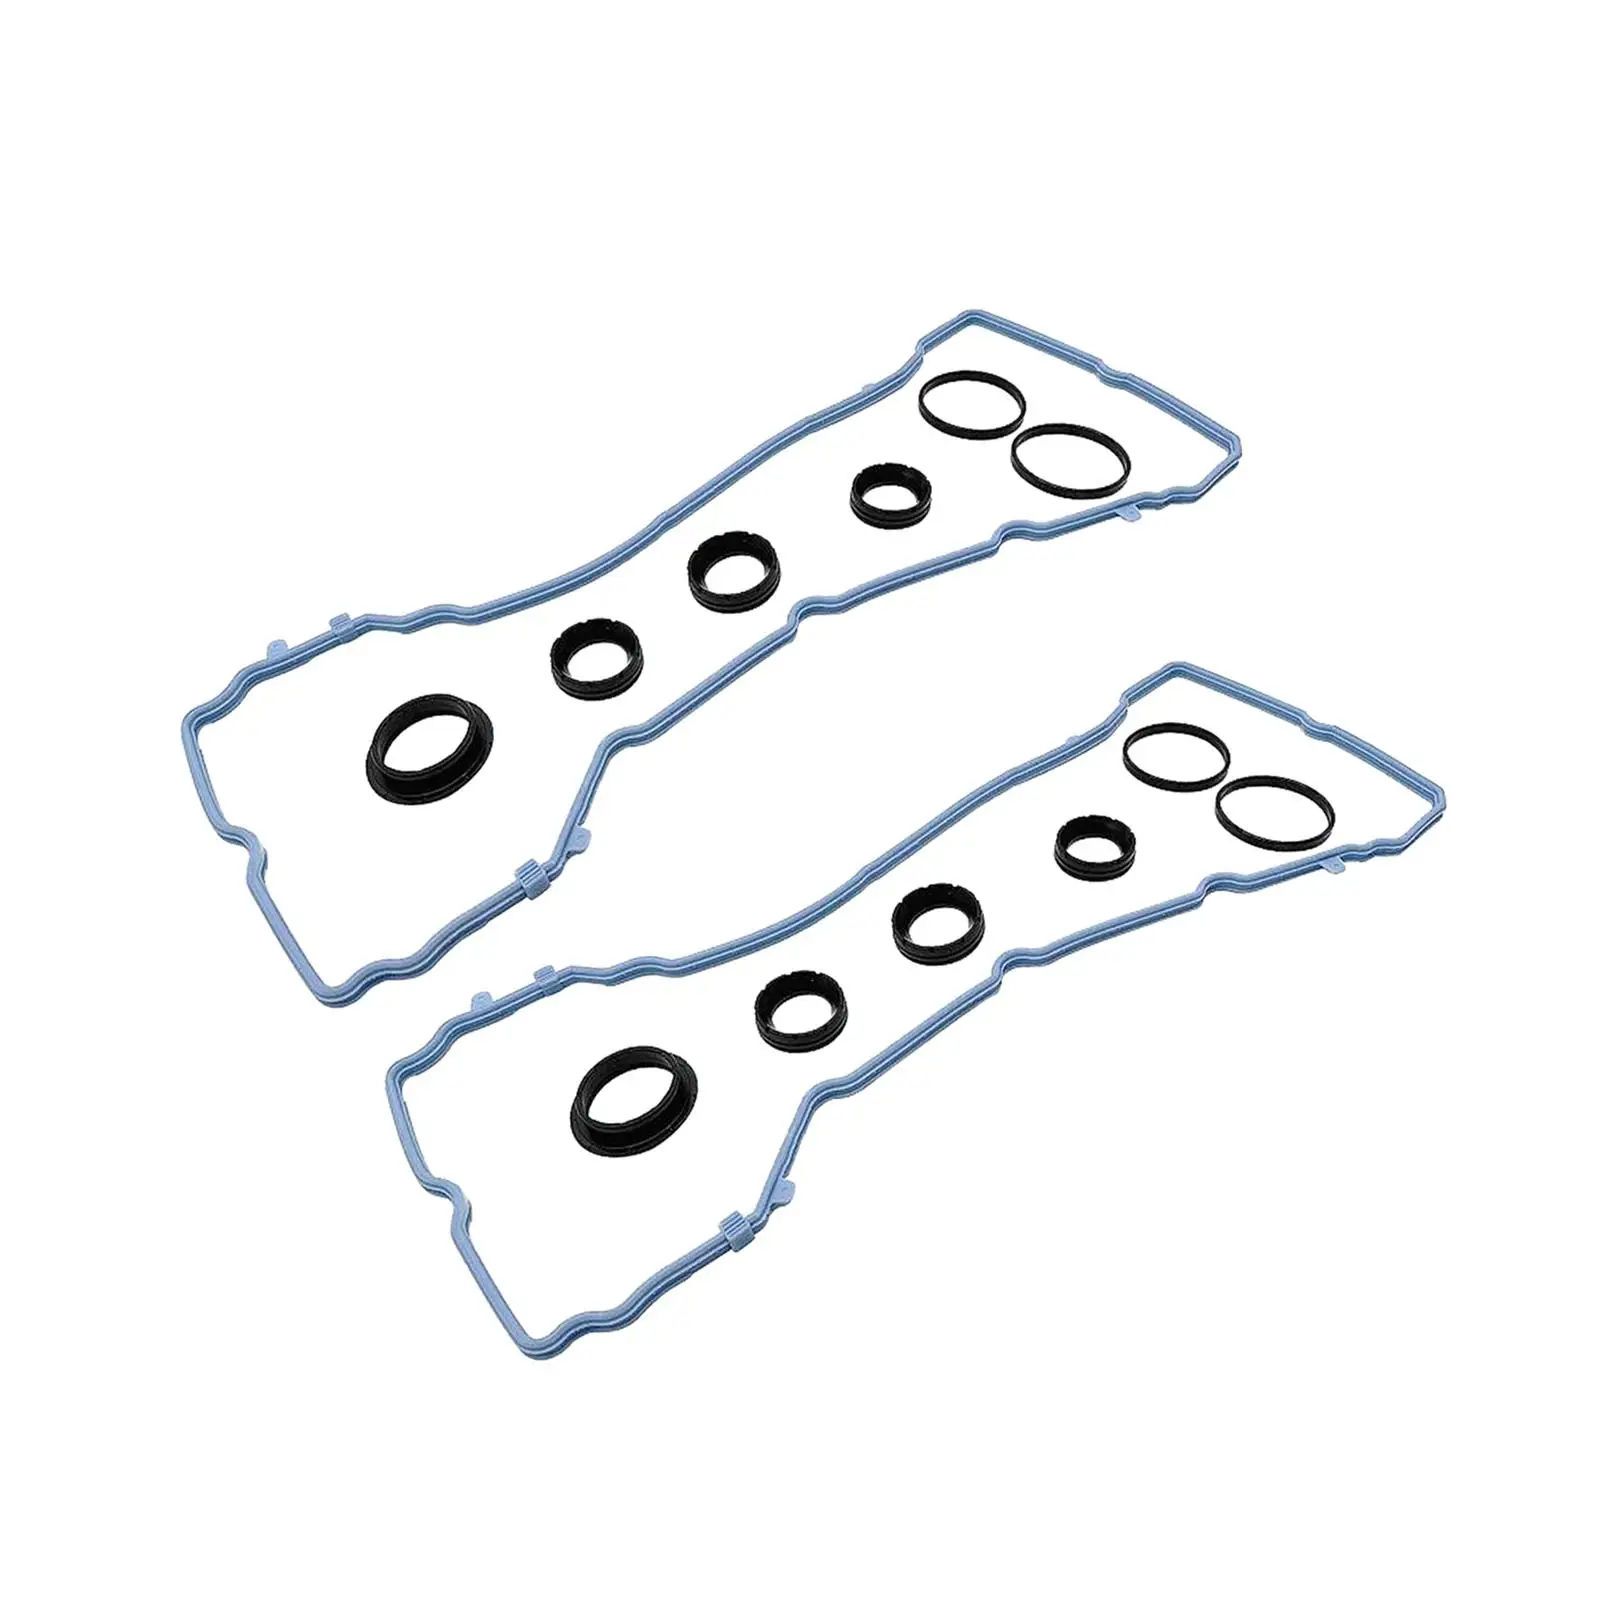 Valve Cover Gasket Set High Quality Directly Replace 5184596AE VS50805R VS 50805 R for Jeep Grand Cherokee Auto Accessories